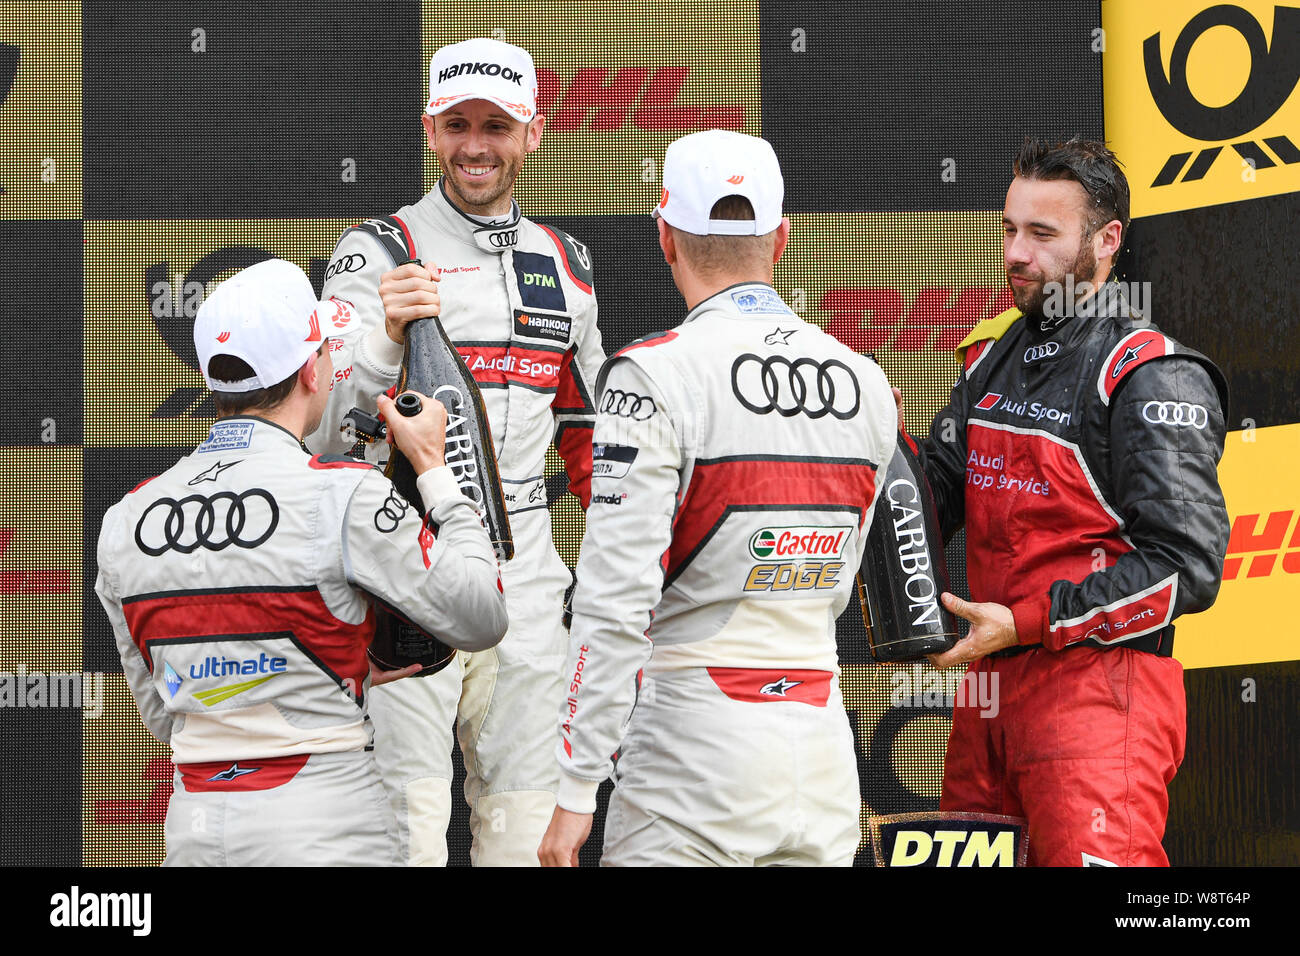 Kent, UK. 11th August 2019. René Rast (Audi Sport Team Rosberg) (centre), Nico Müller (Audi Sport Team Abt Sportsline) (left) and Robin Frijns (Audi Sport Team Abt Sportsline)  (right) congratulate each other at the winner’s presentation during DTM Race 2 of the DTM (German Touring Cars) and W Series at Brands Hatch GP Circuit on Sunday, August 11, 2019 in KENT, ENGLAND. Credit: Taka G Wu/Alamy Live News Credit: Taka Wu/Alamy Live News Stock Photo